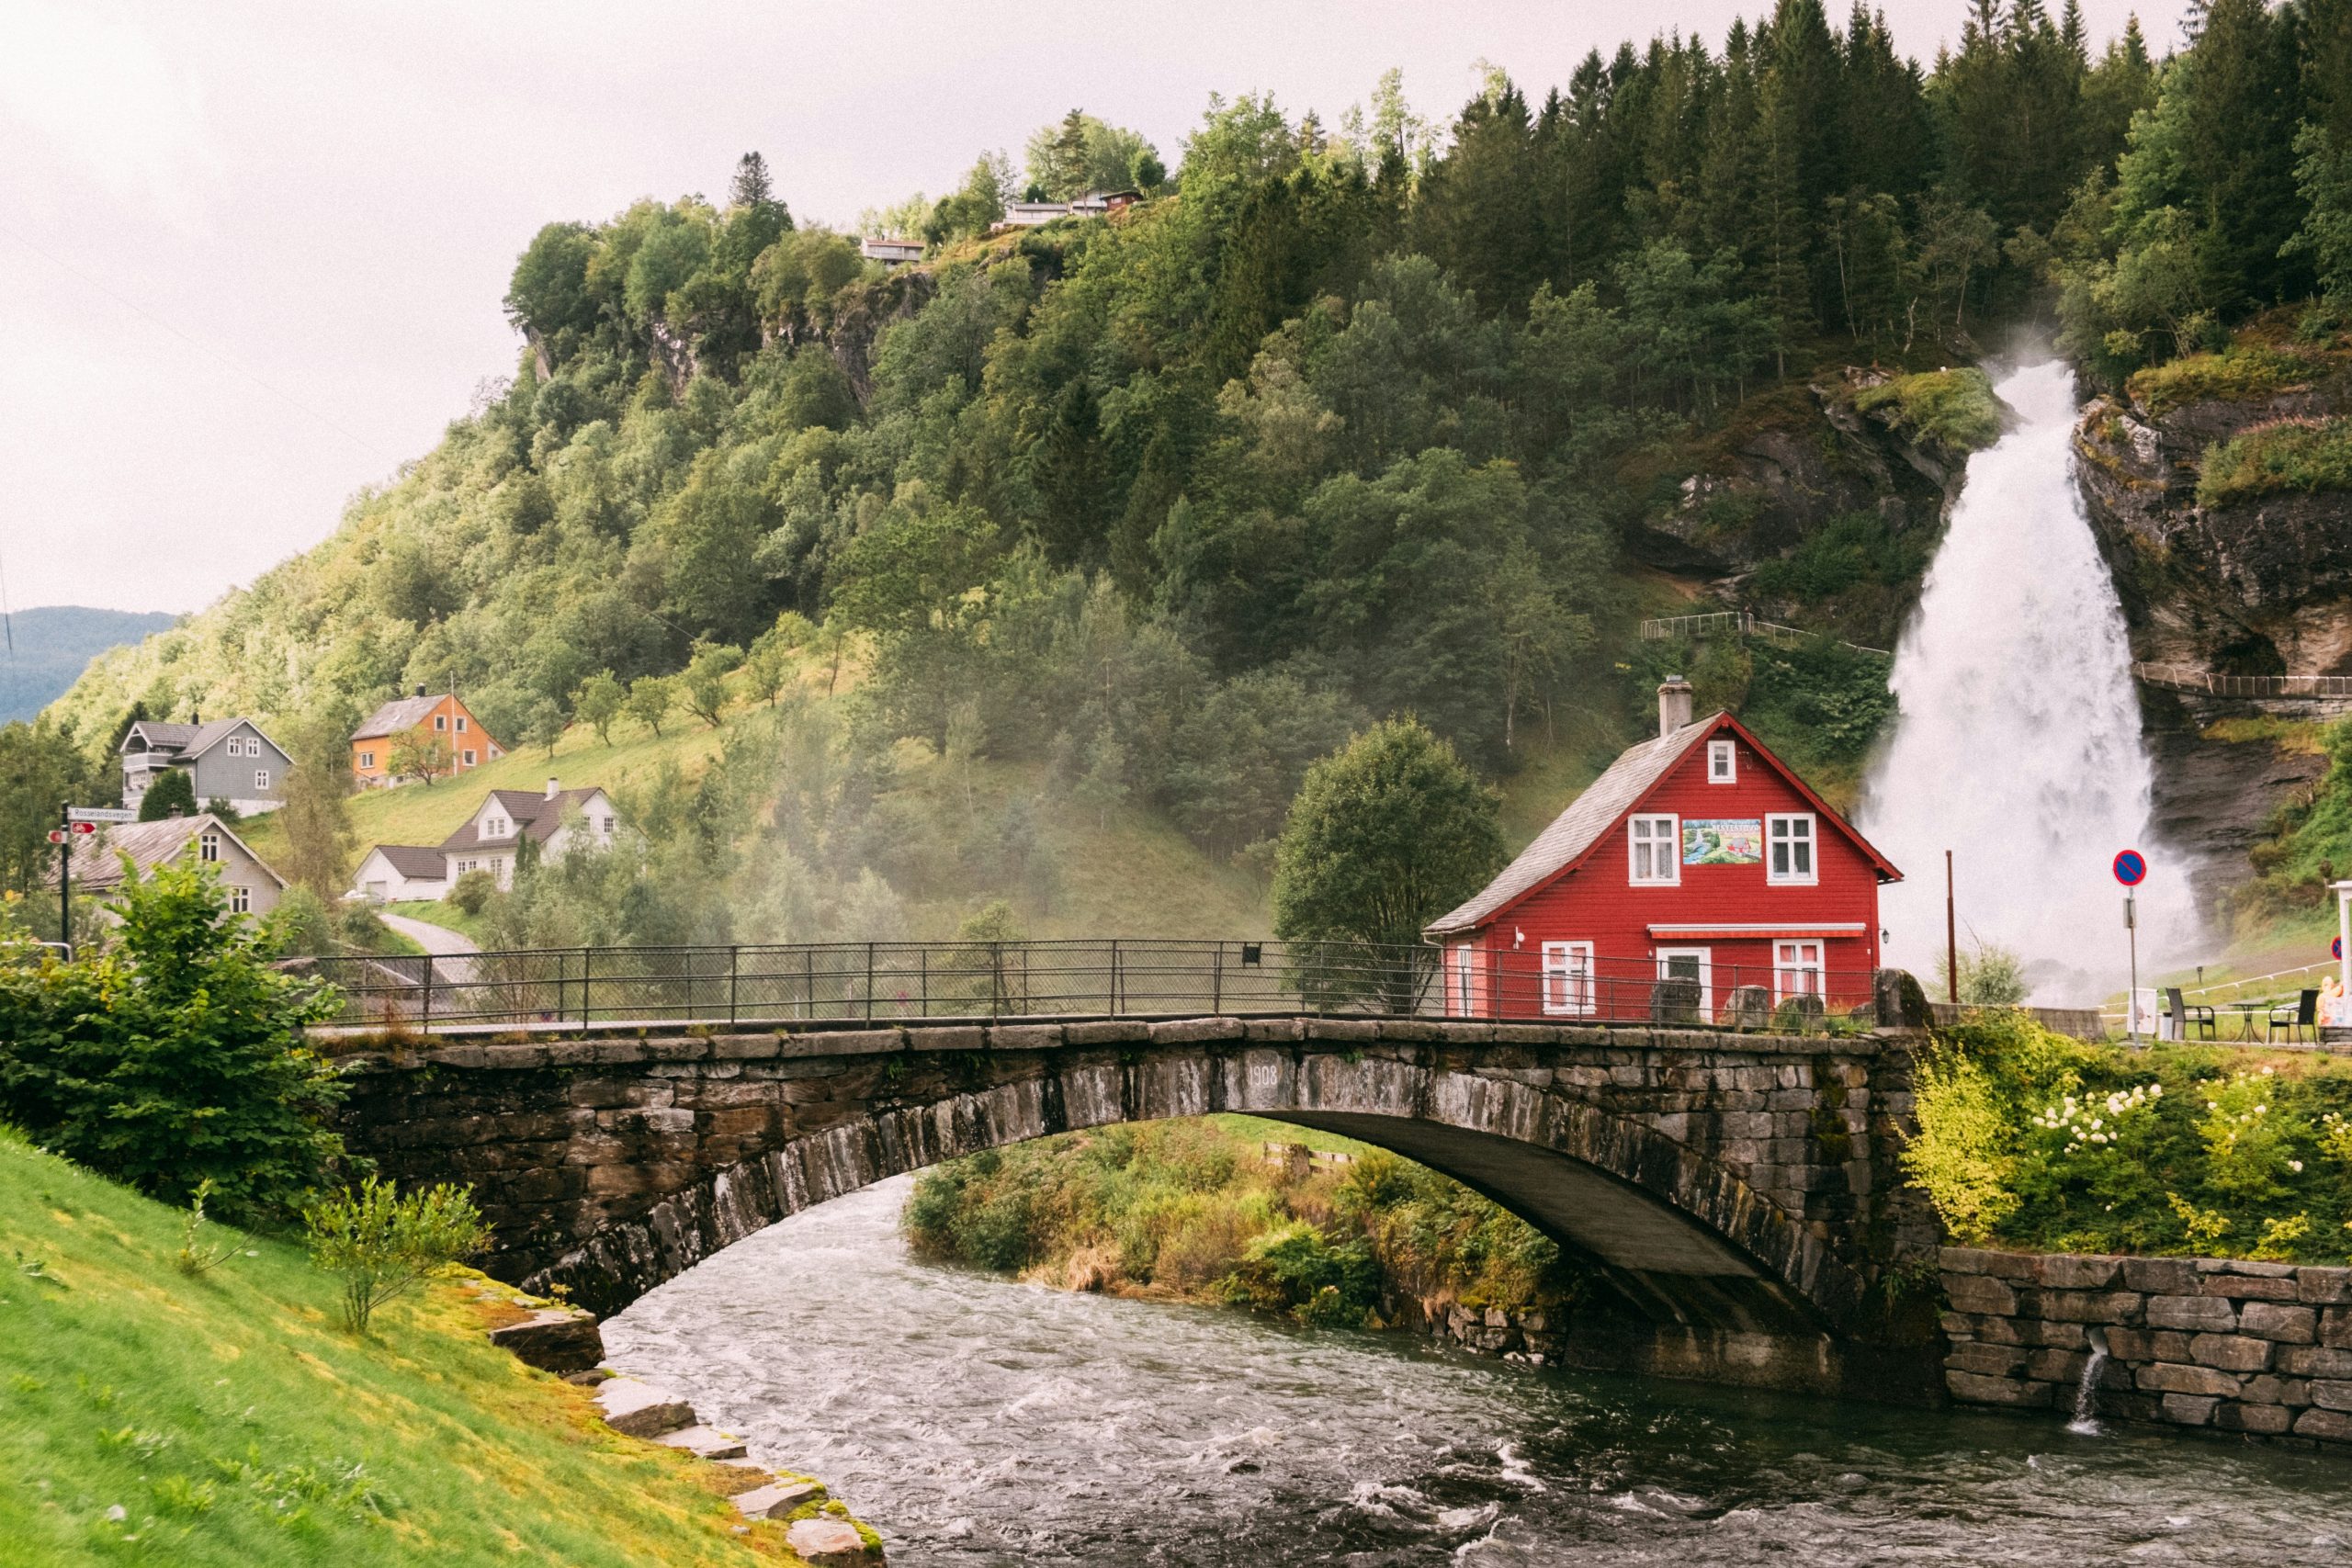 explore norway's breathtaking fjords and discover the stunning natural beauty of this scandinavian wonderland. plan your adventure and experience the awe-inspiring landscapes, towering cliffs, and crystal-clear waters that define norway's iconic fjords.